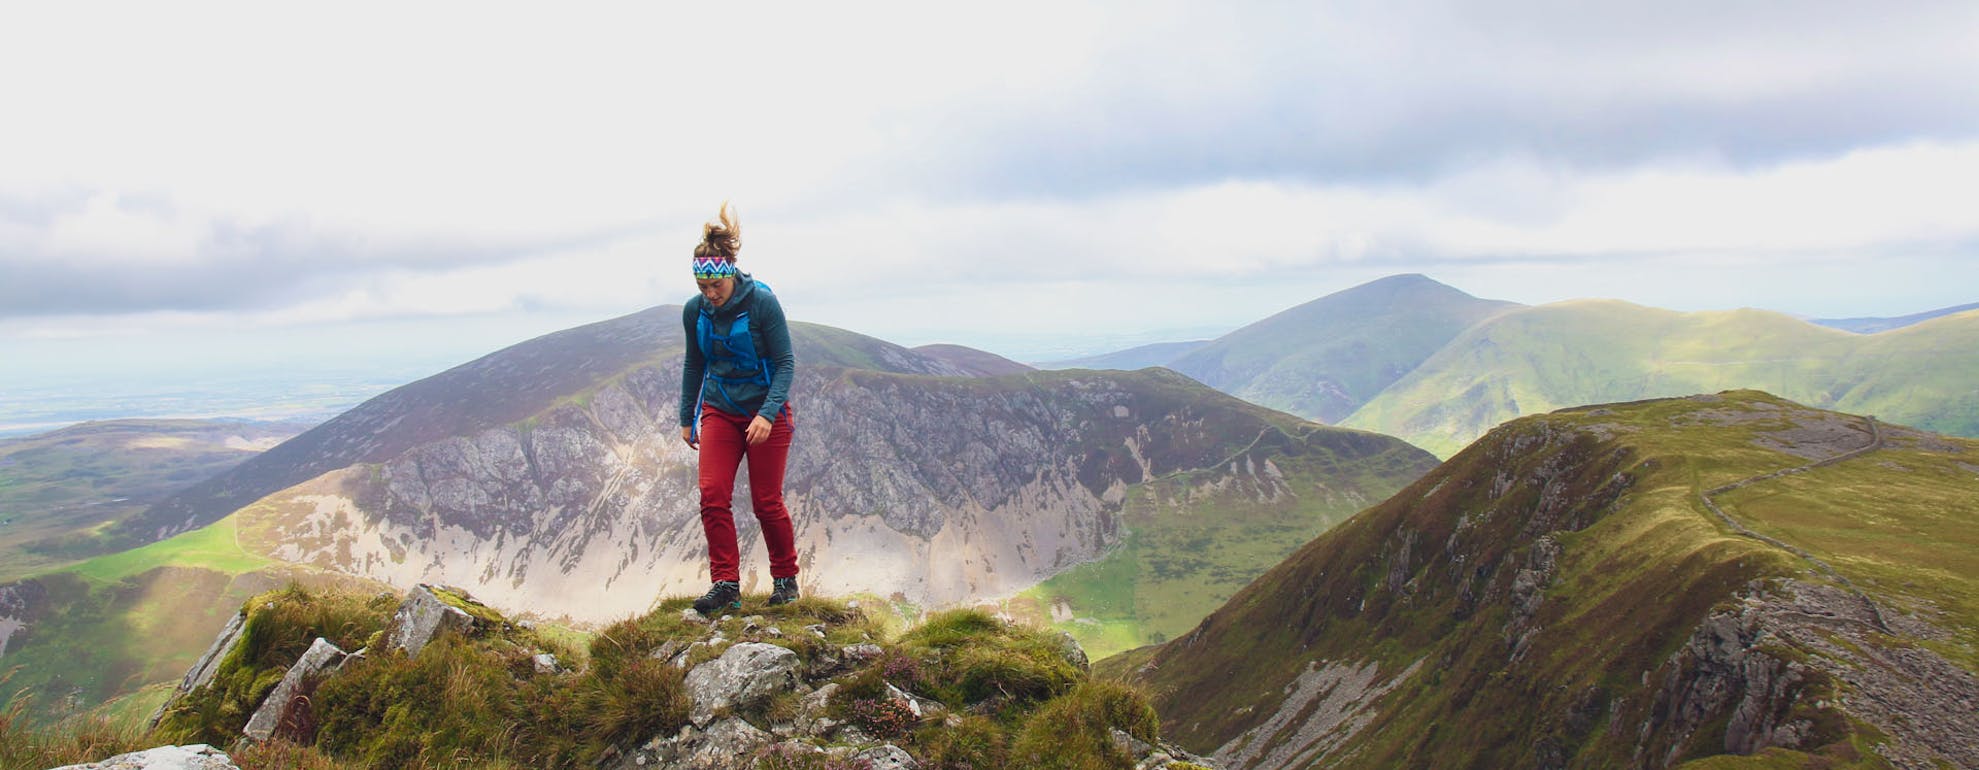 a-beginners-guide-to-hiking-with-montane-ambassador-kathryn-roberts